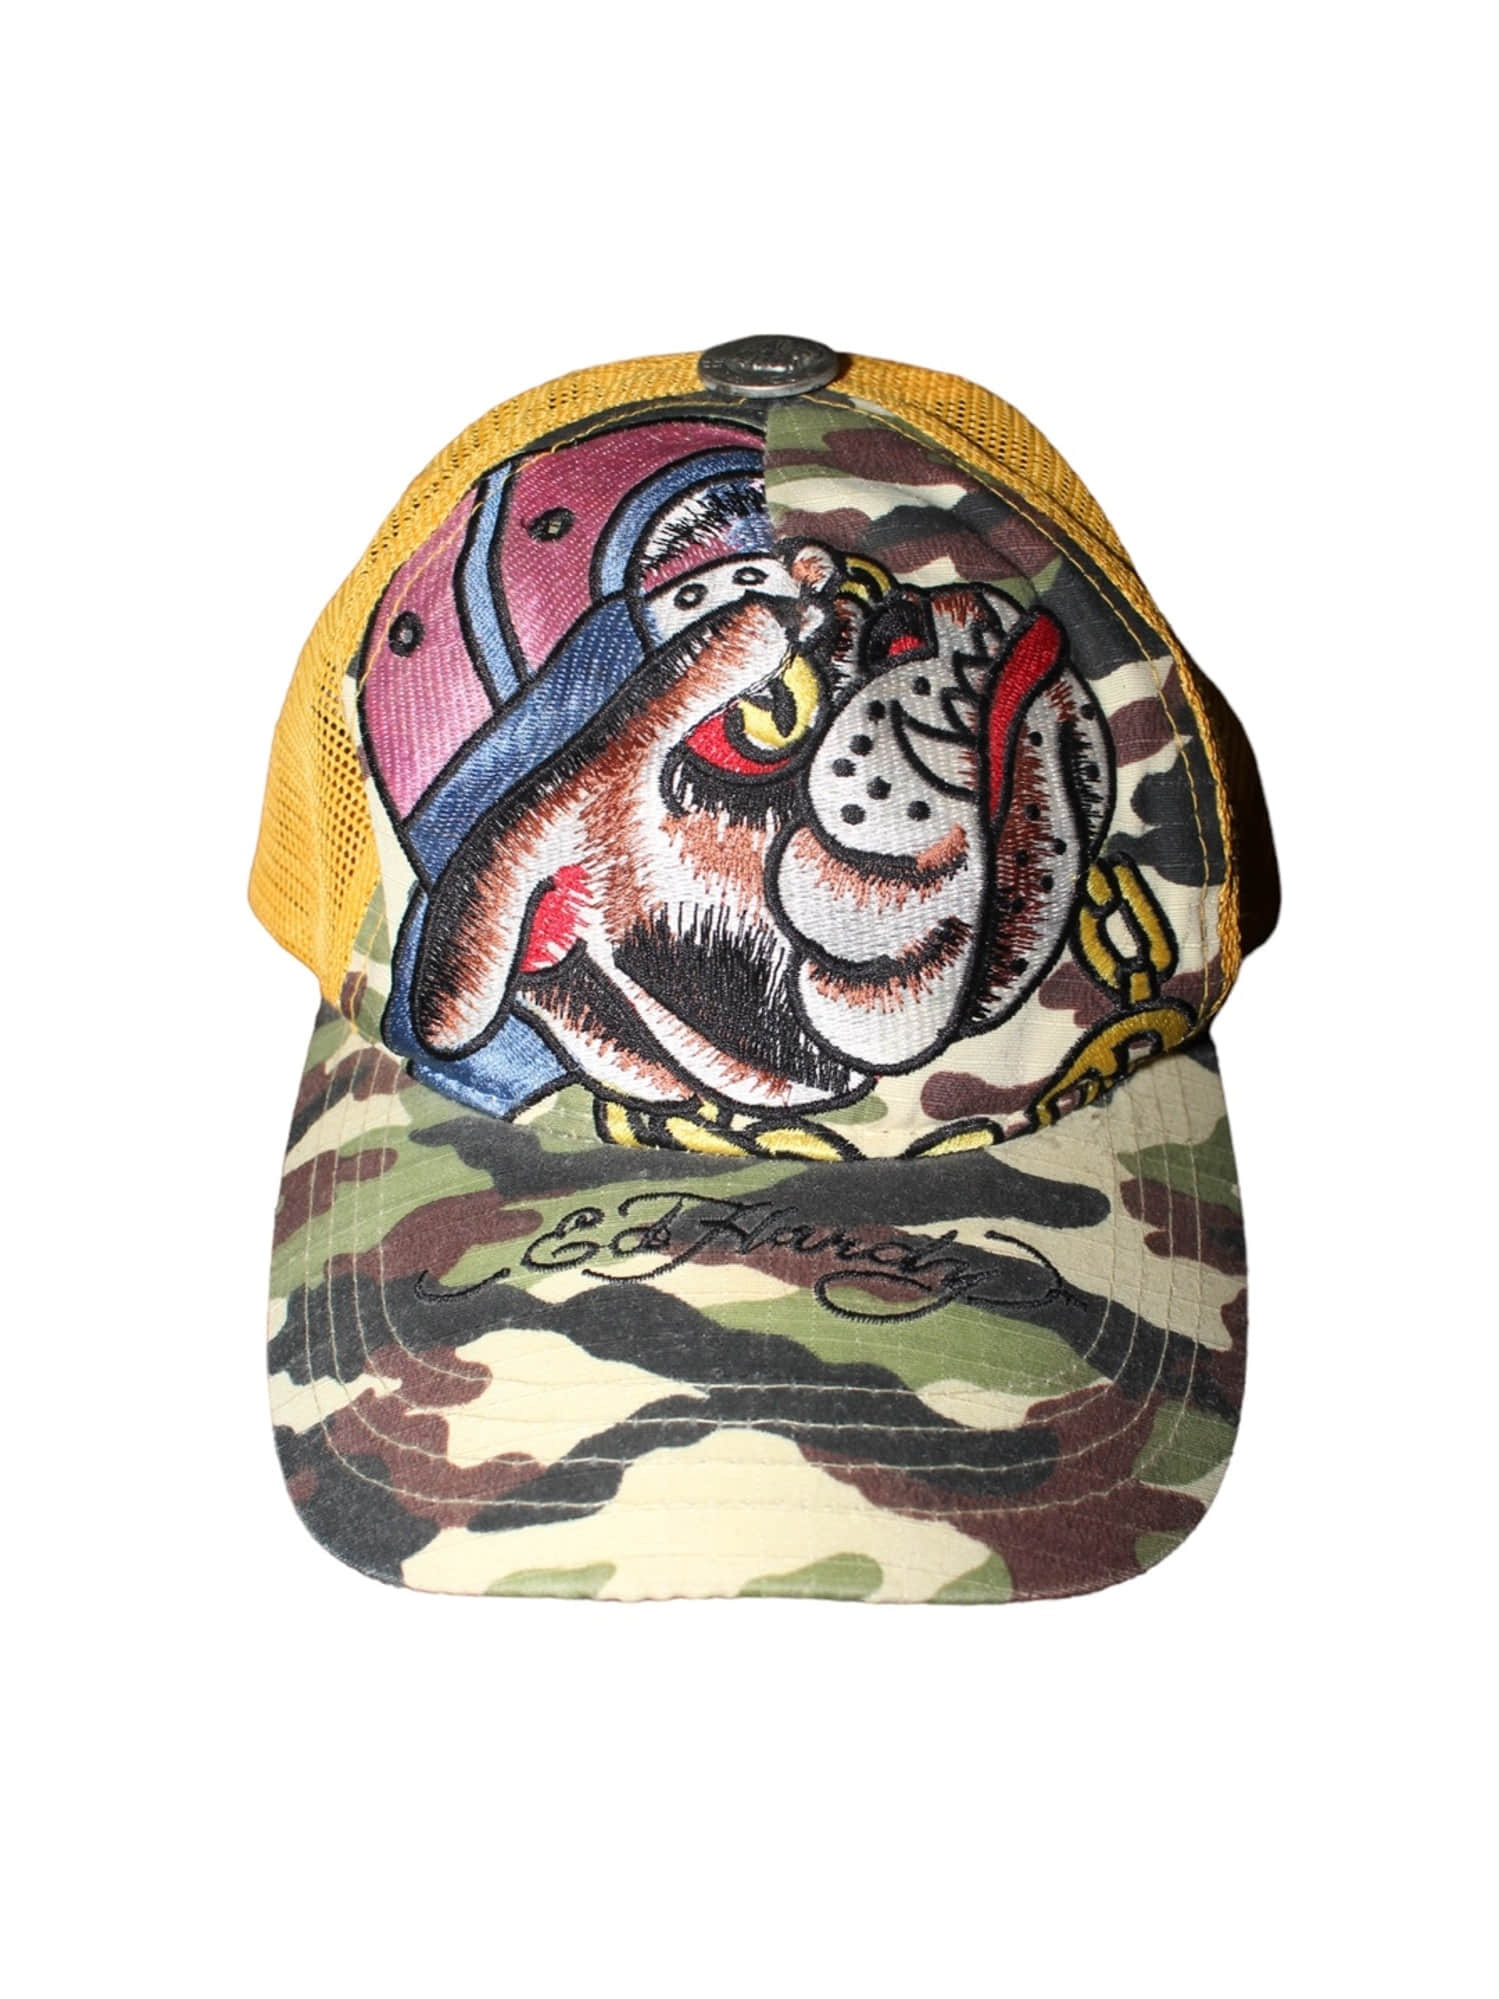 Ed Hardy Pit Bull Embroied Mesh Cap